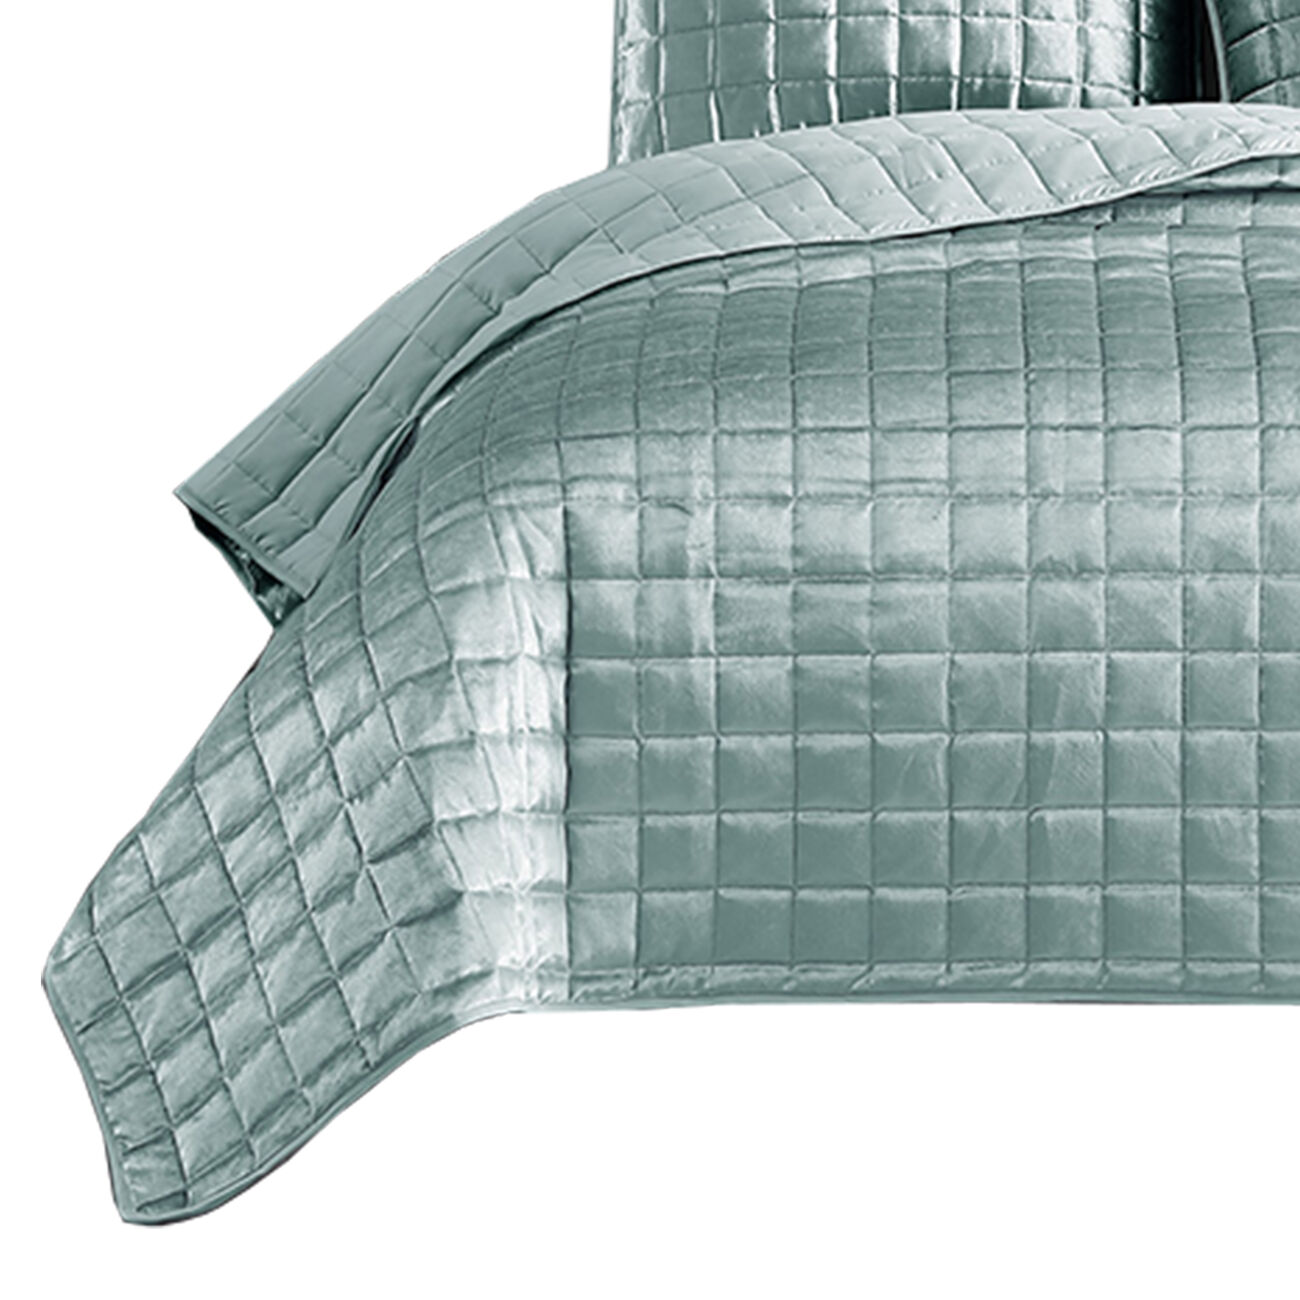 3 Piece King Size Coverlet Set with Stitched Square Pattern, Sea Green